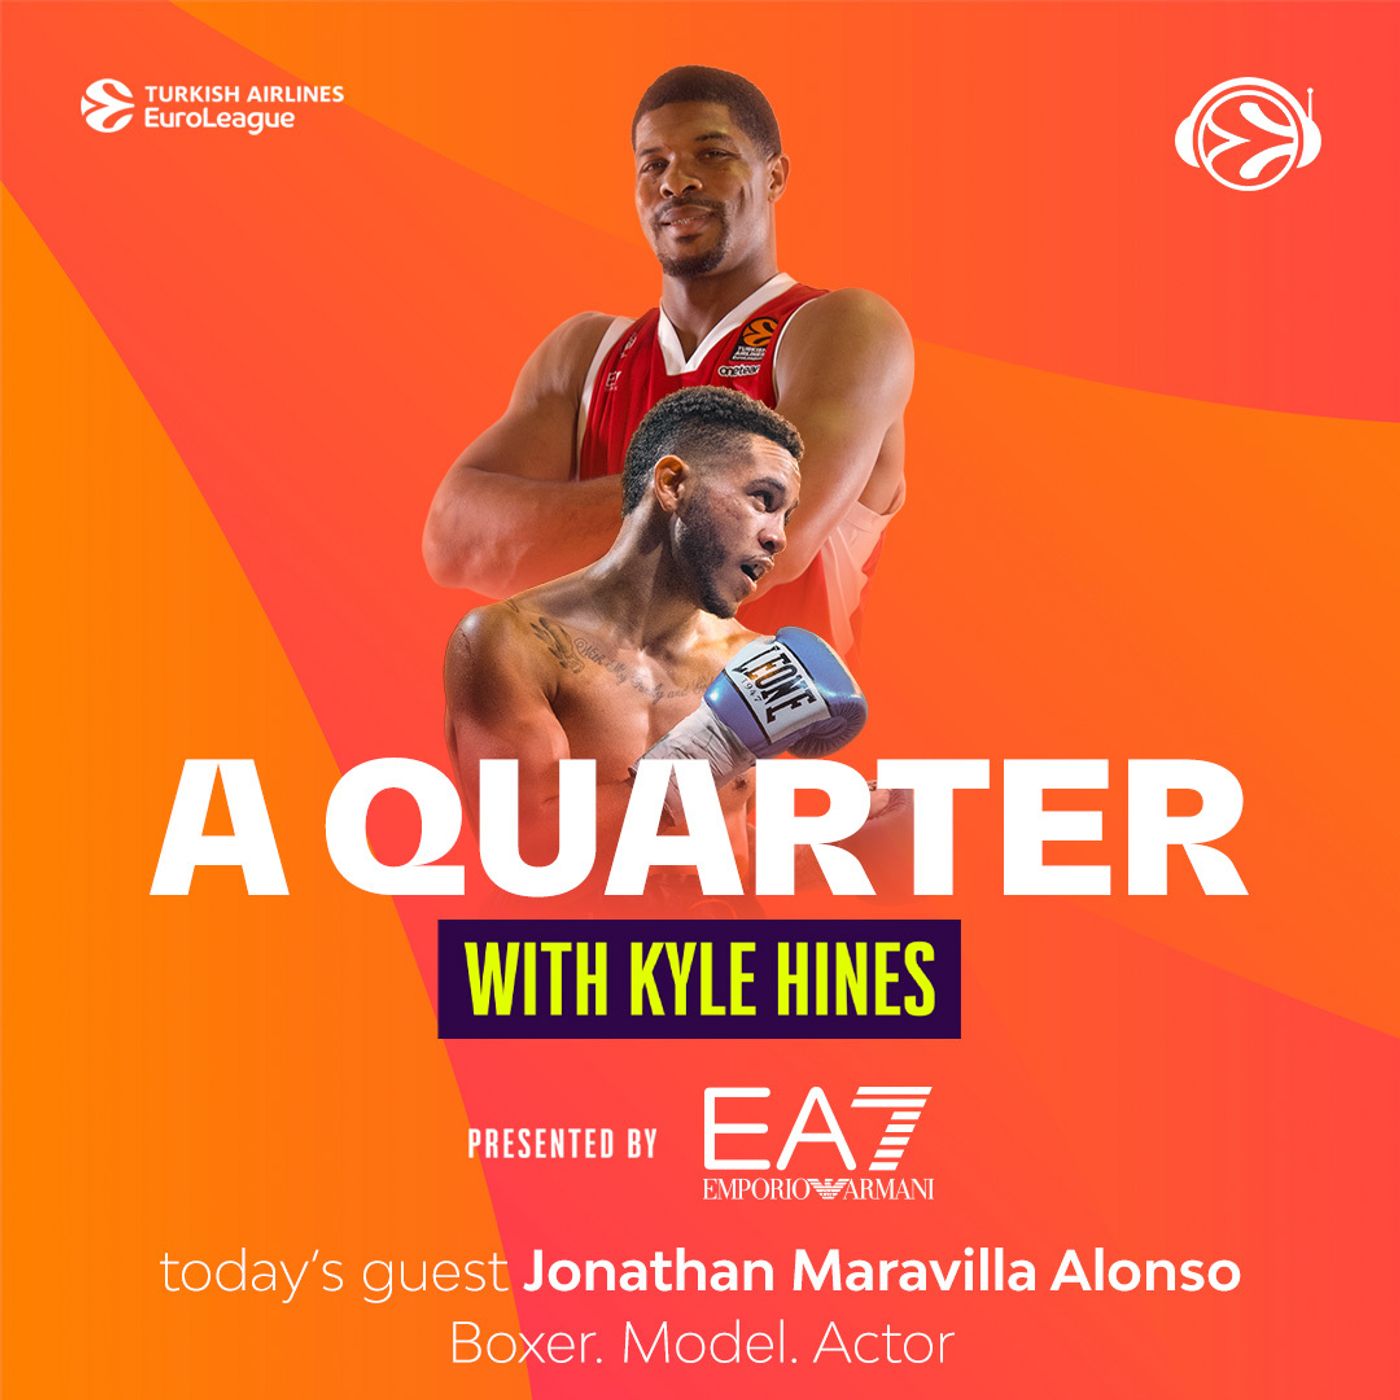 S5 Ep6: A Quarter with Kyle Hines and Jonathan Maravilla Alonso